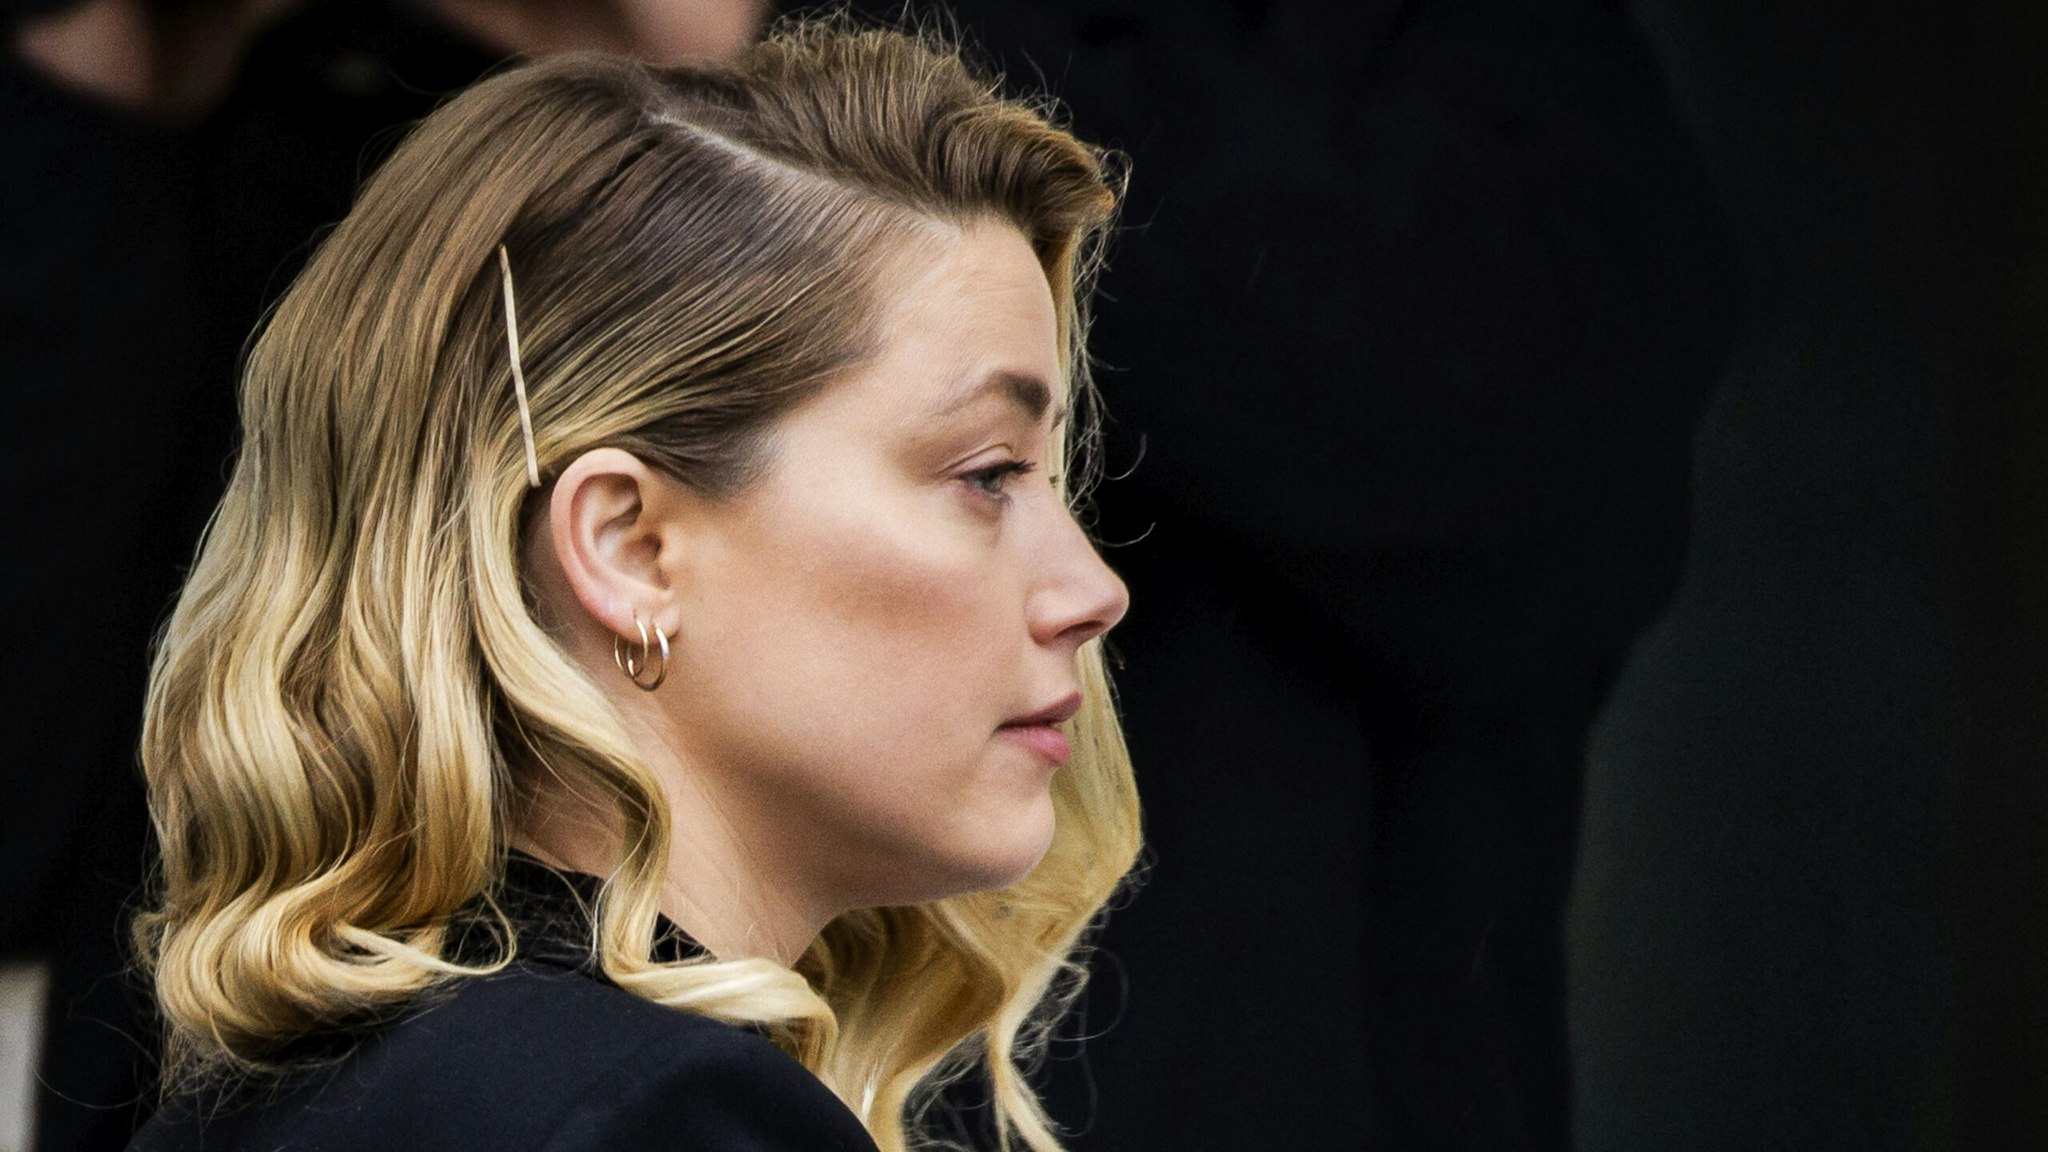 FAIRFAX, VA - APRIL 18: (NY &amp; NJ NEWSPAPERS OUT) Amber Heard arrives outside court during the Johnny Depp and Amber Heard civil trial at Fairfax County Circuit Court on April 18, 2022 in Fairfax, Virginia. Depp is seeking $50 million in alleged damages to his career over an op-ed Heard wrote in the Washington Post in 2018.